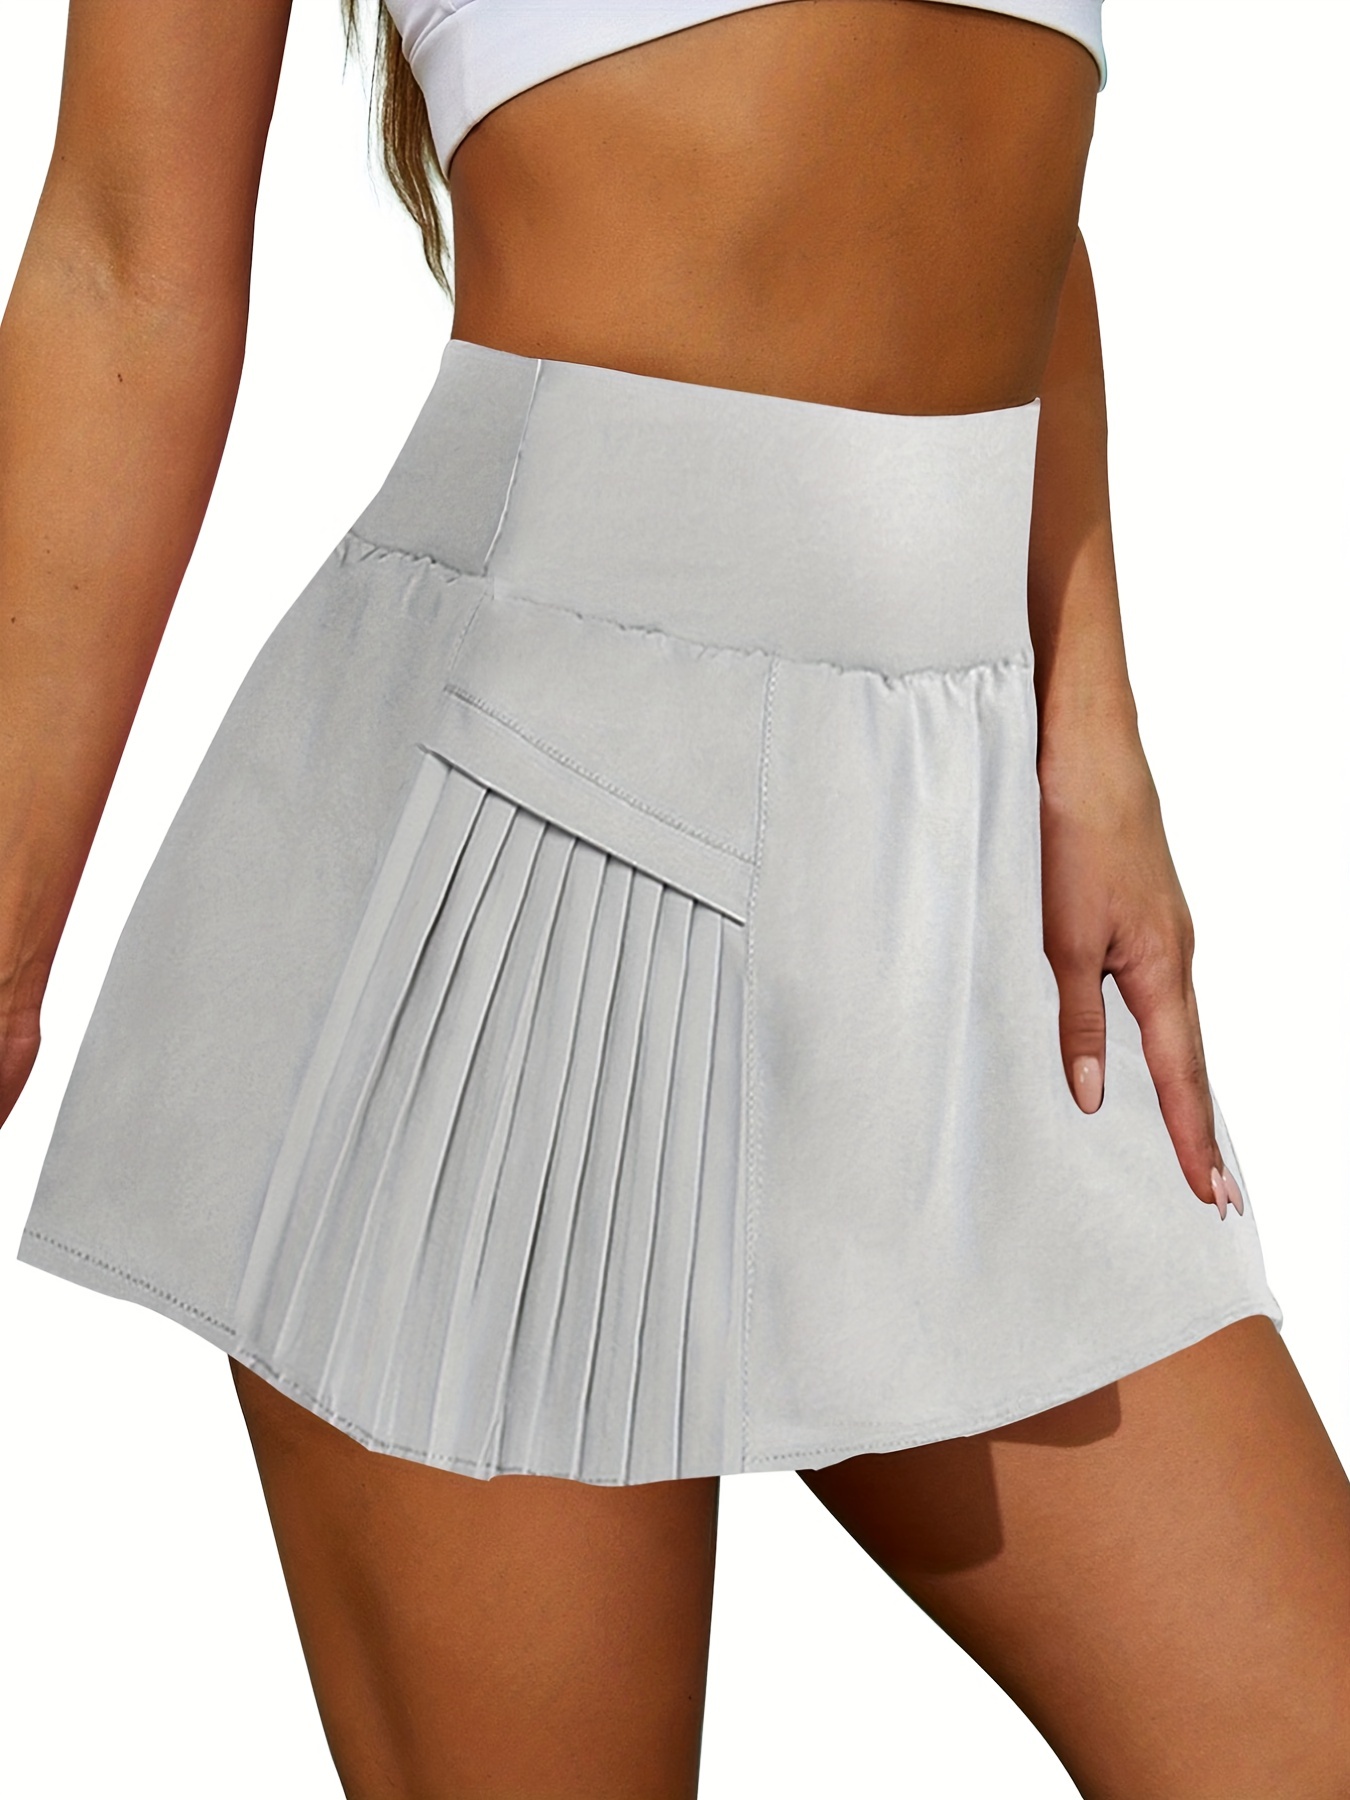 Pleated Tennis Skirt with Pockets for Women Athletic Golf Skorts Skirts  with Shorts Cross Waist